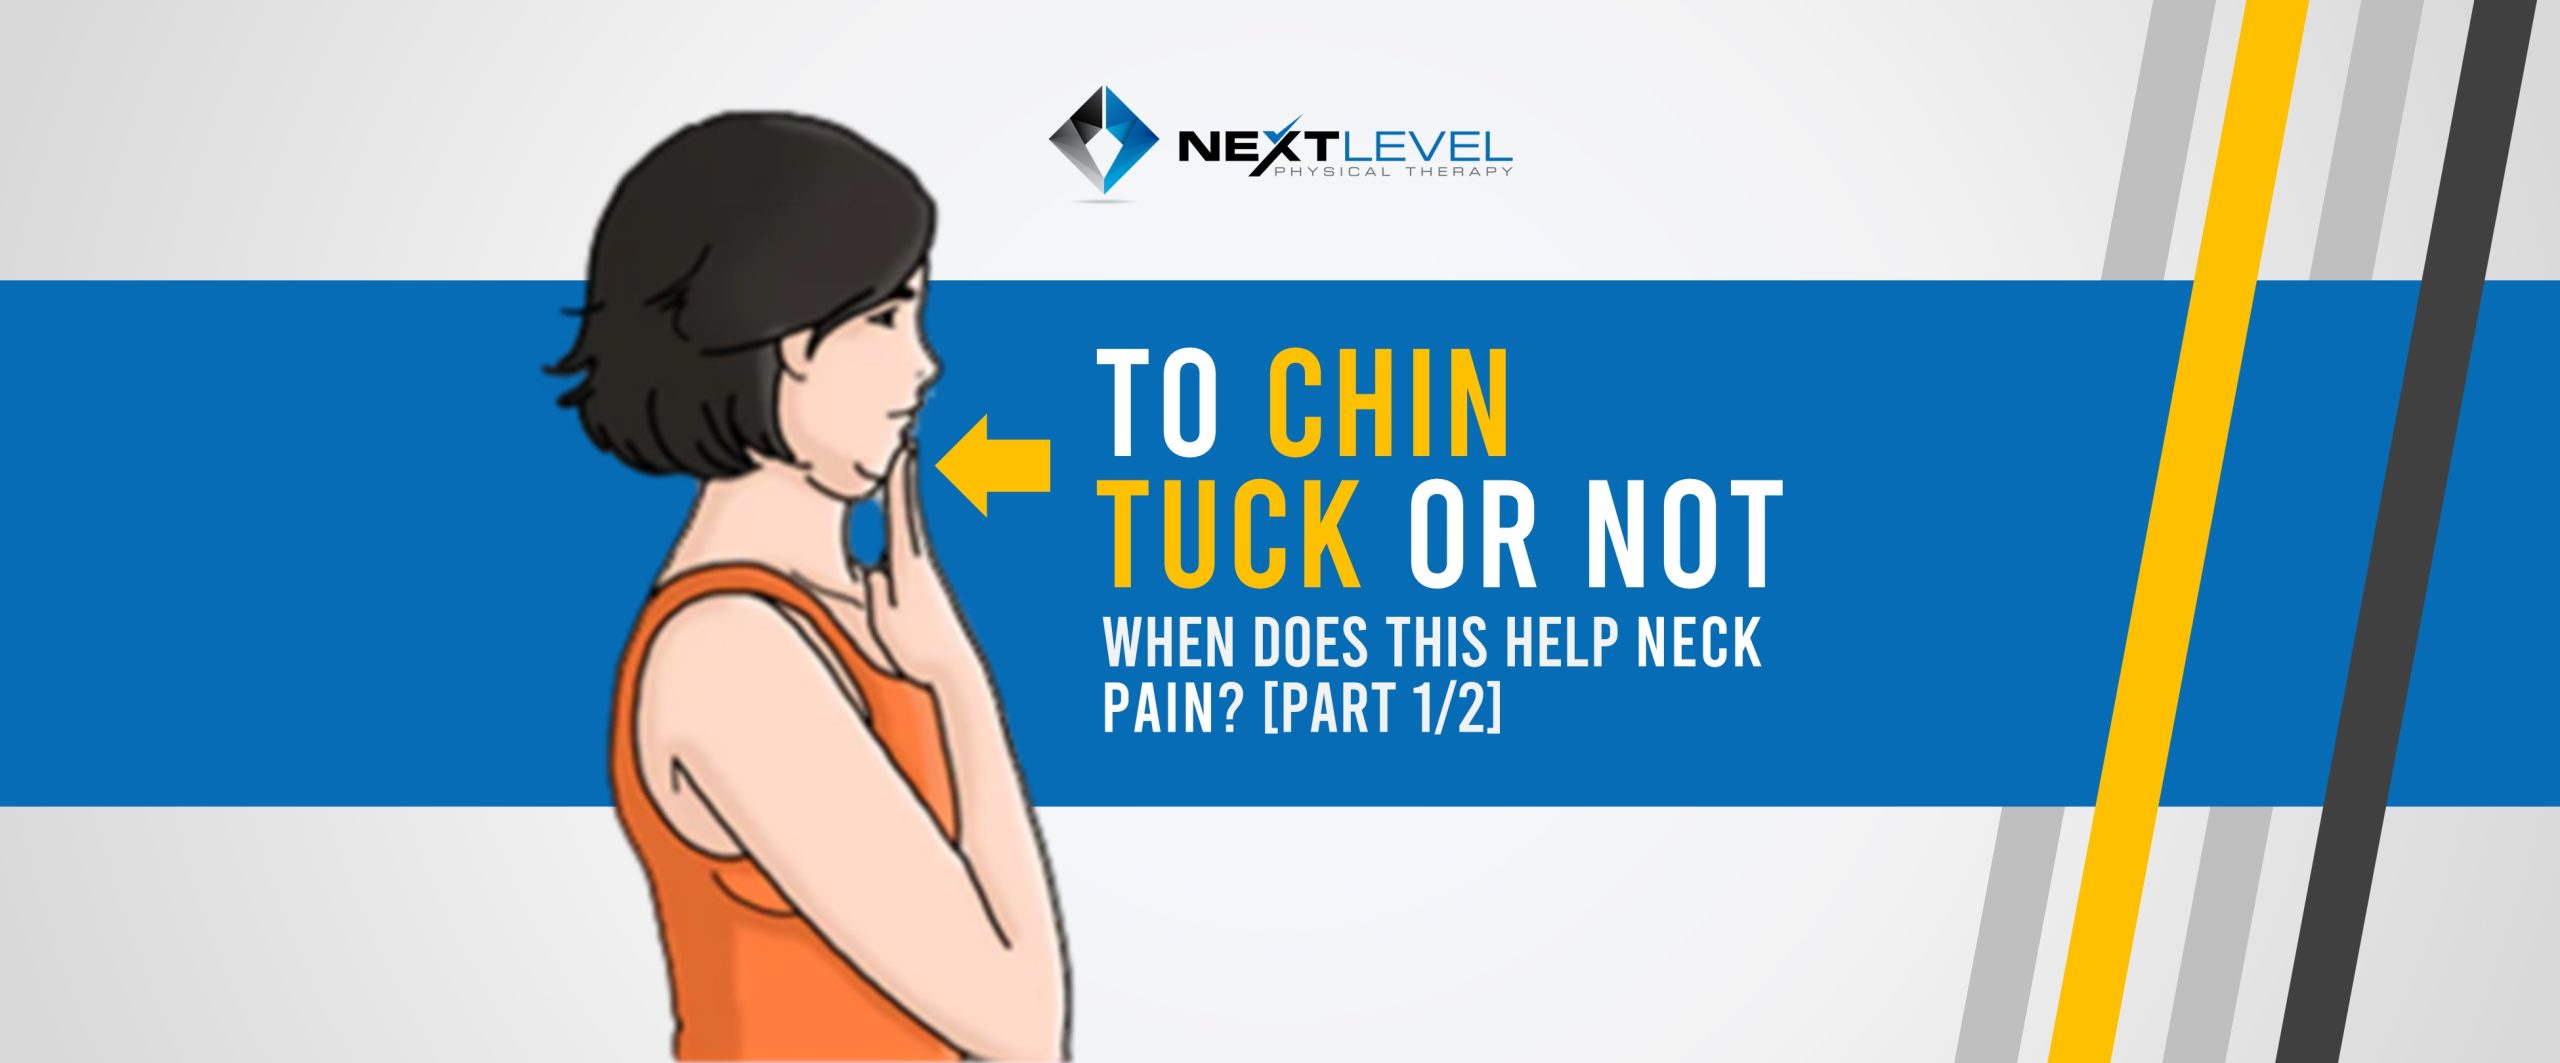 To Chin Tuck Or Not (Part 1/2): When Does This Help Neck Pain? - Next ...